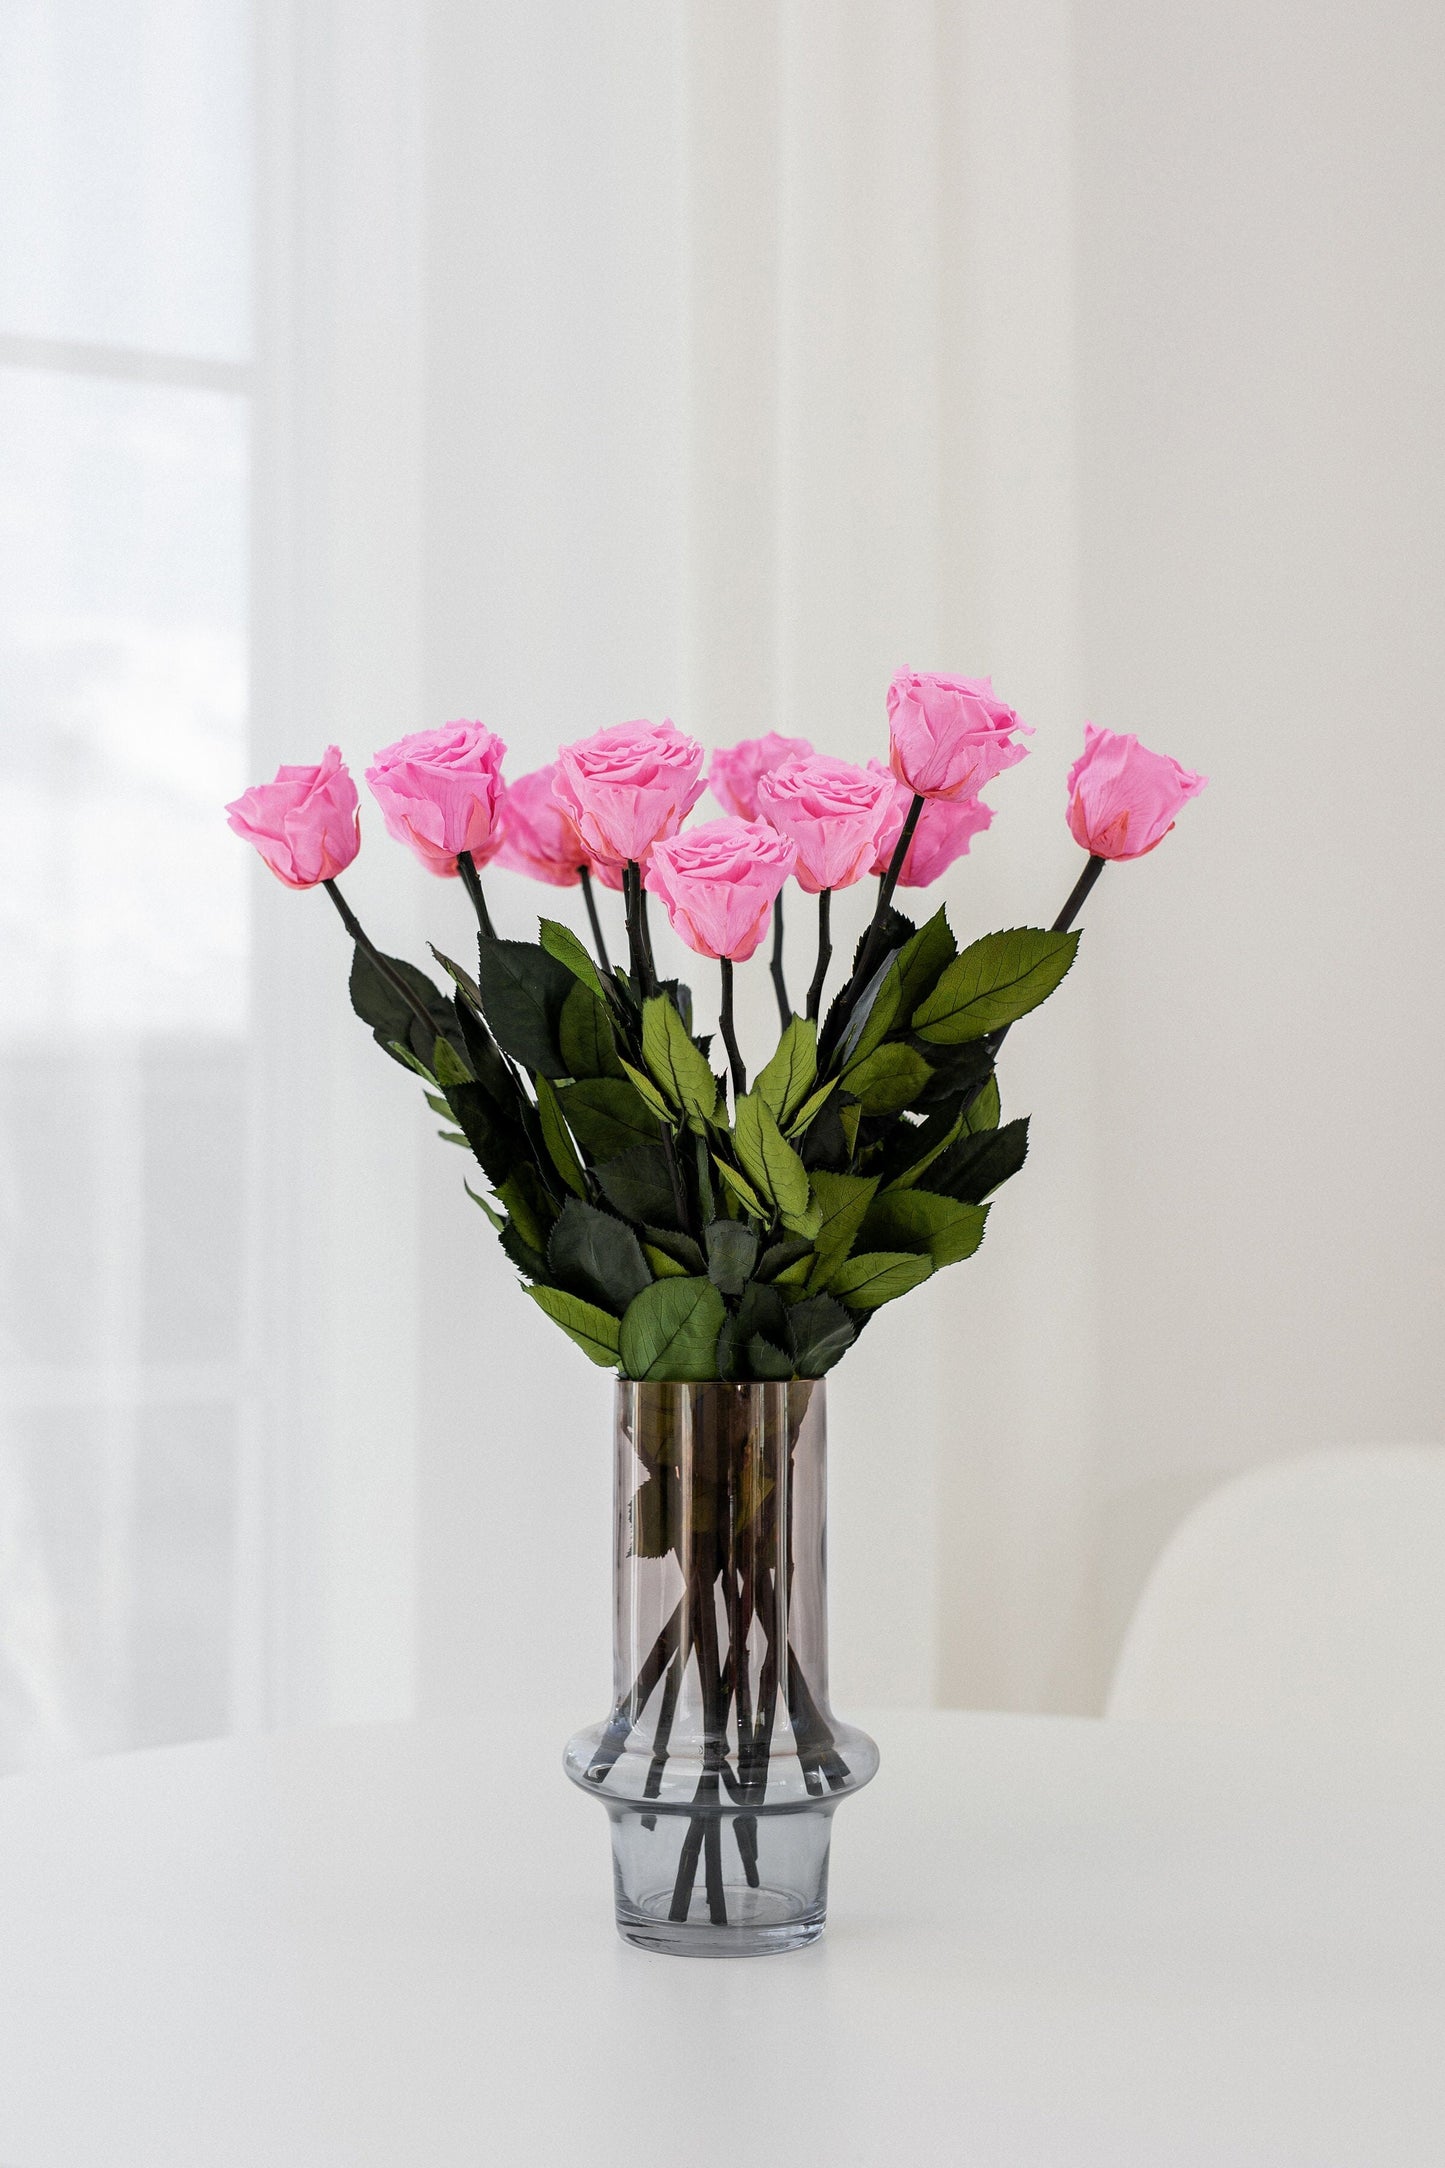 Long Stem Roses | Candy Pink Roses